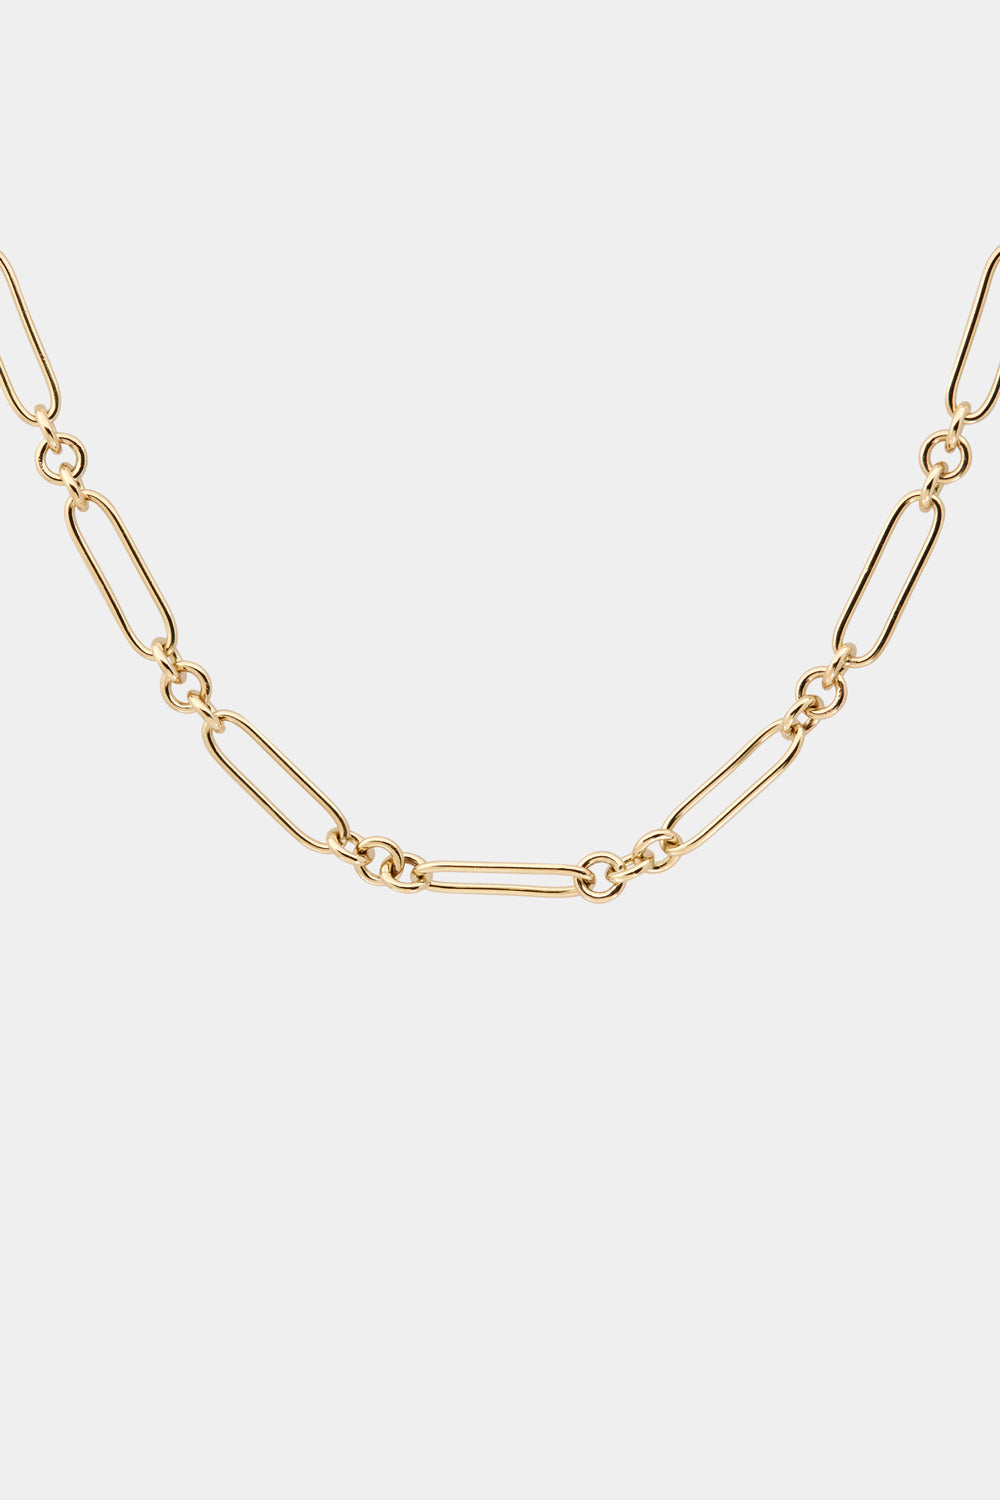 Lennox Necklace | Yellow Gold, More Options Available